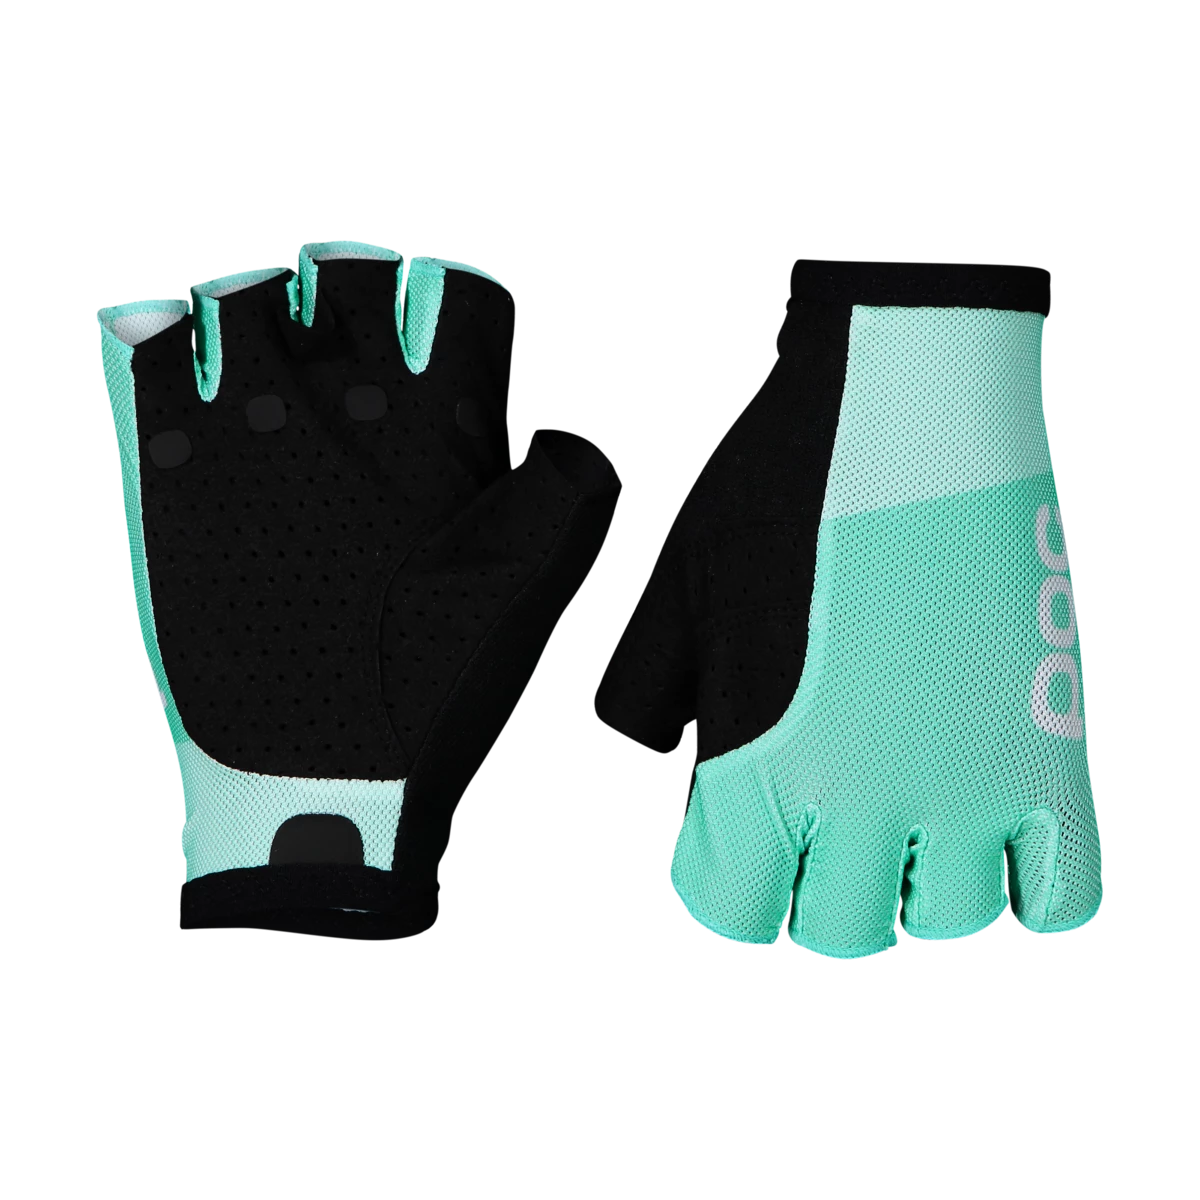 POC Essential Road Mesh Short Glove Fluorite Green, S Cycling Gloves